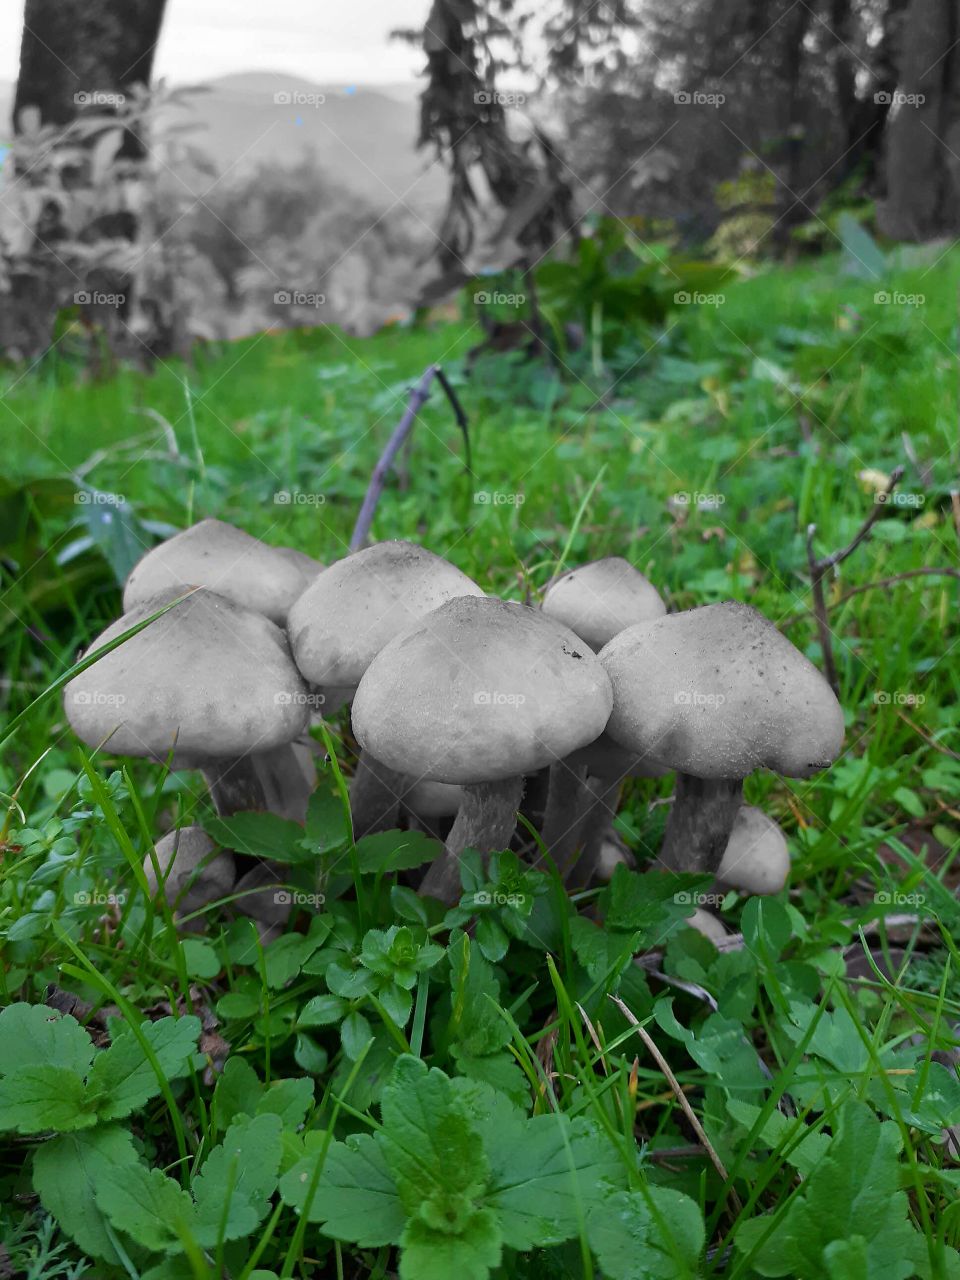 How they look like mushrooms with no color compared to green grass??